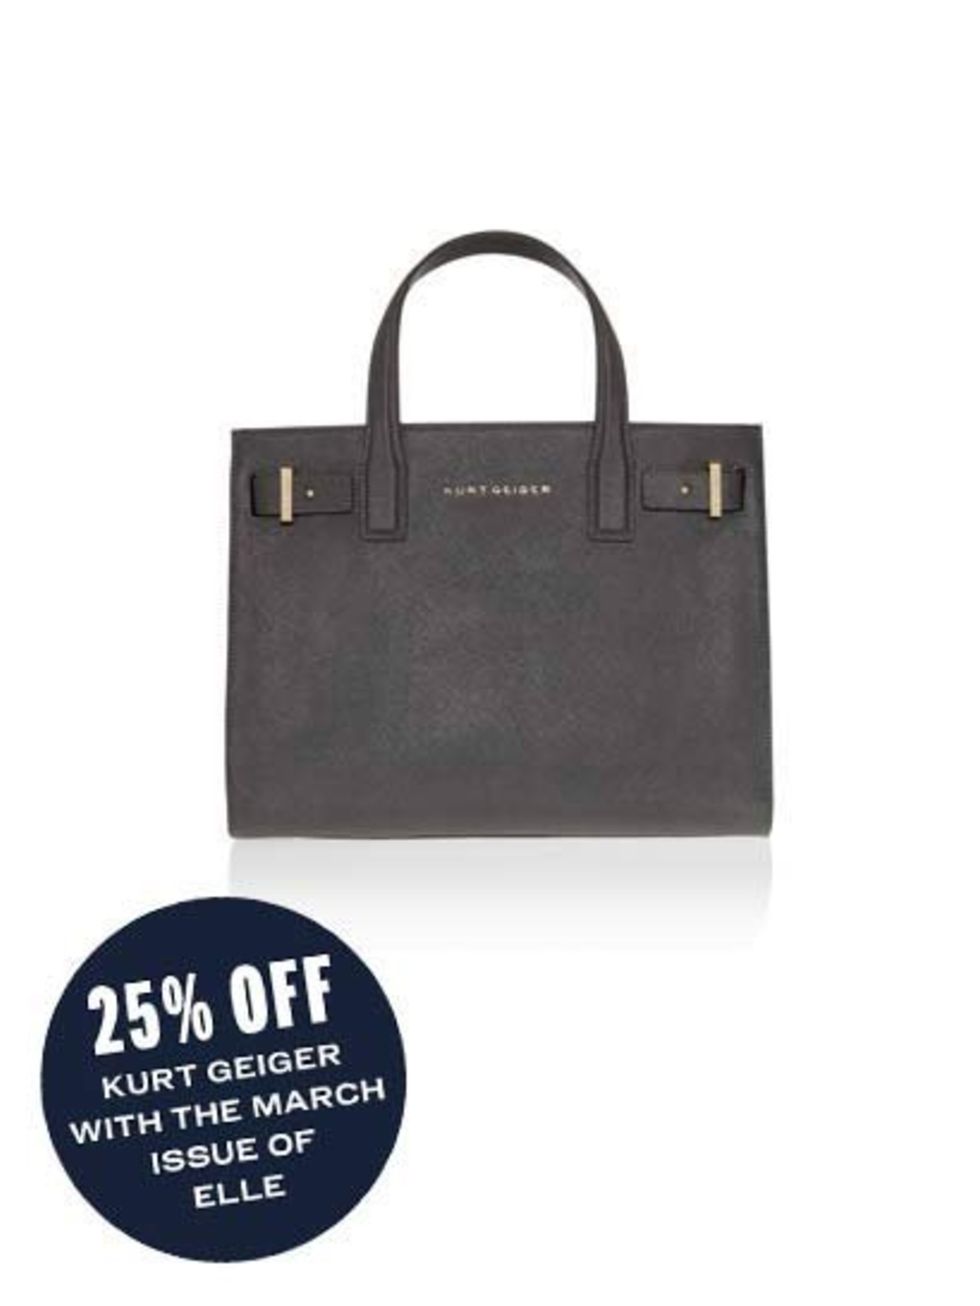 <p>Why not opt for black instead of grey? </p><p><a href="http://www.kurtgeiger.com/saffiano-london-tote-grey-saffiano-leather-kurt-geiger-london-accessory.html">Classic tote</a>, £195</p>